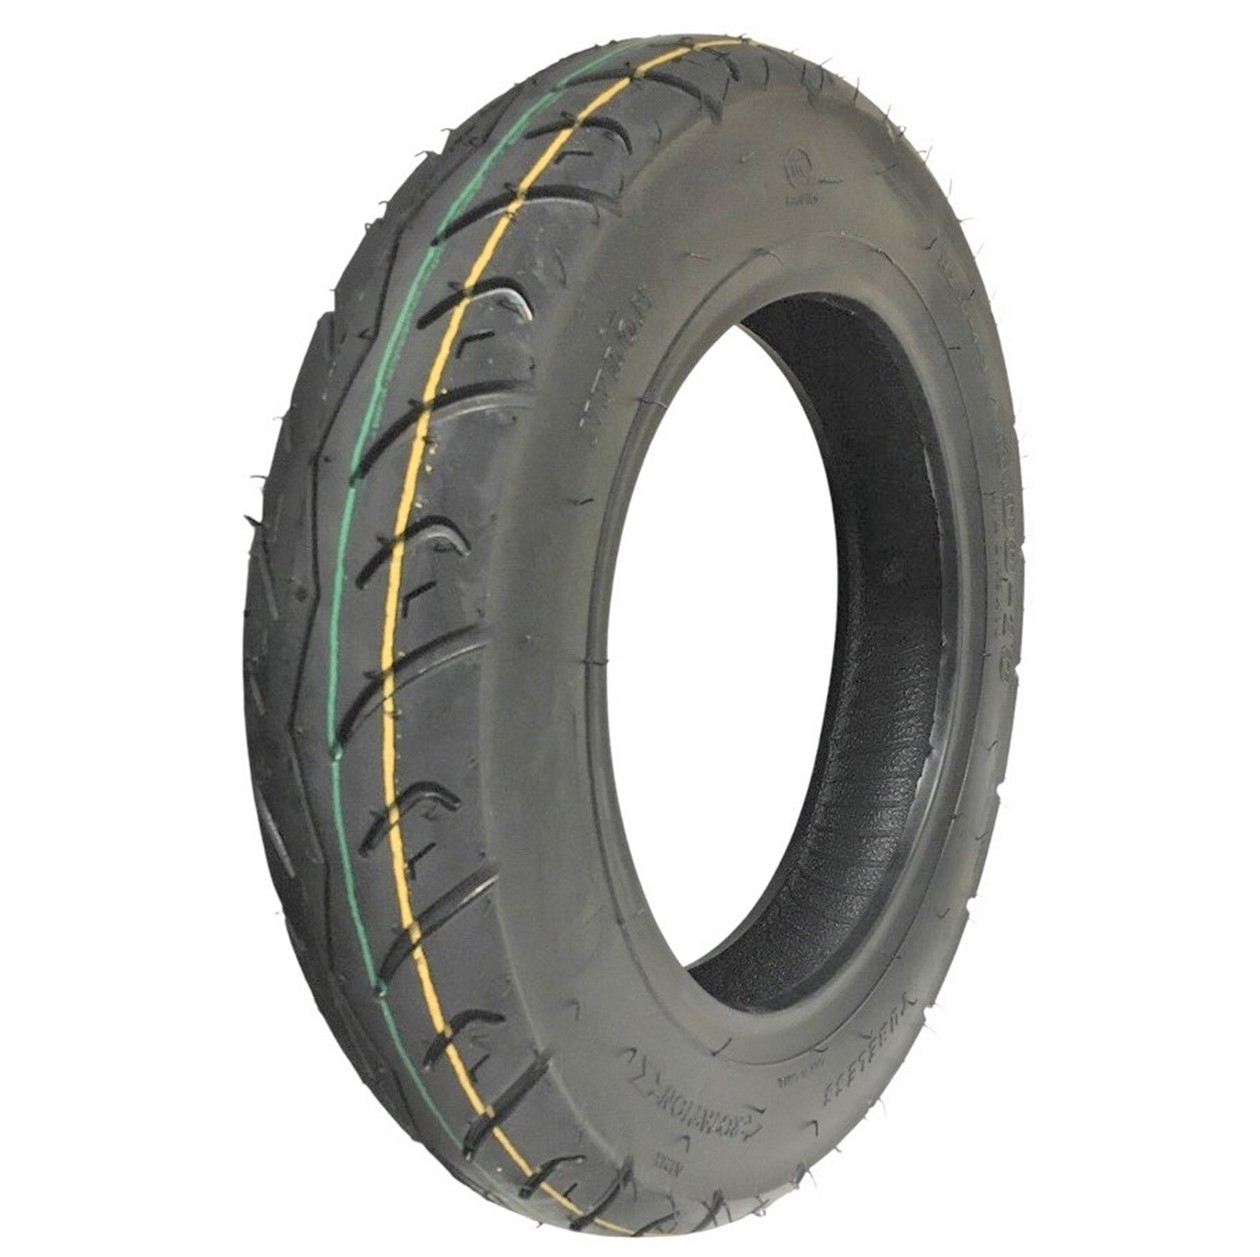 Tire (10") Scooter Tire 3.00-10 TL